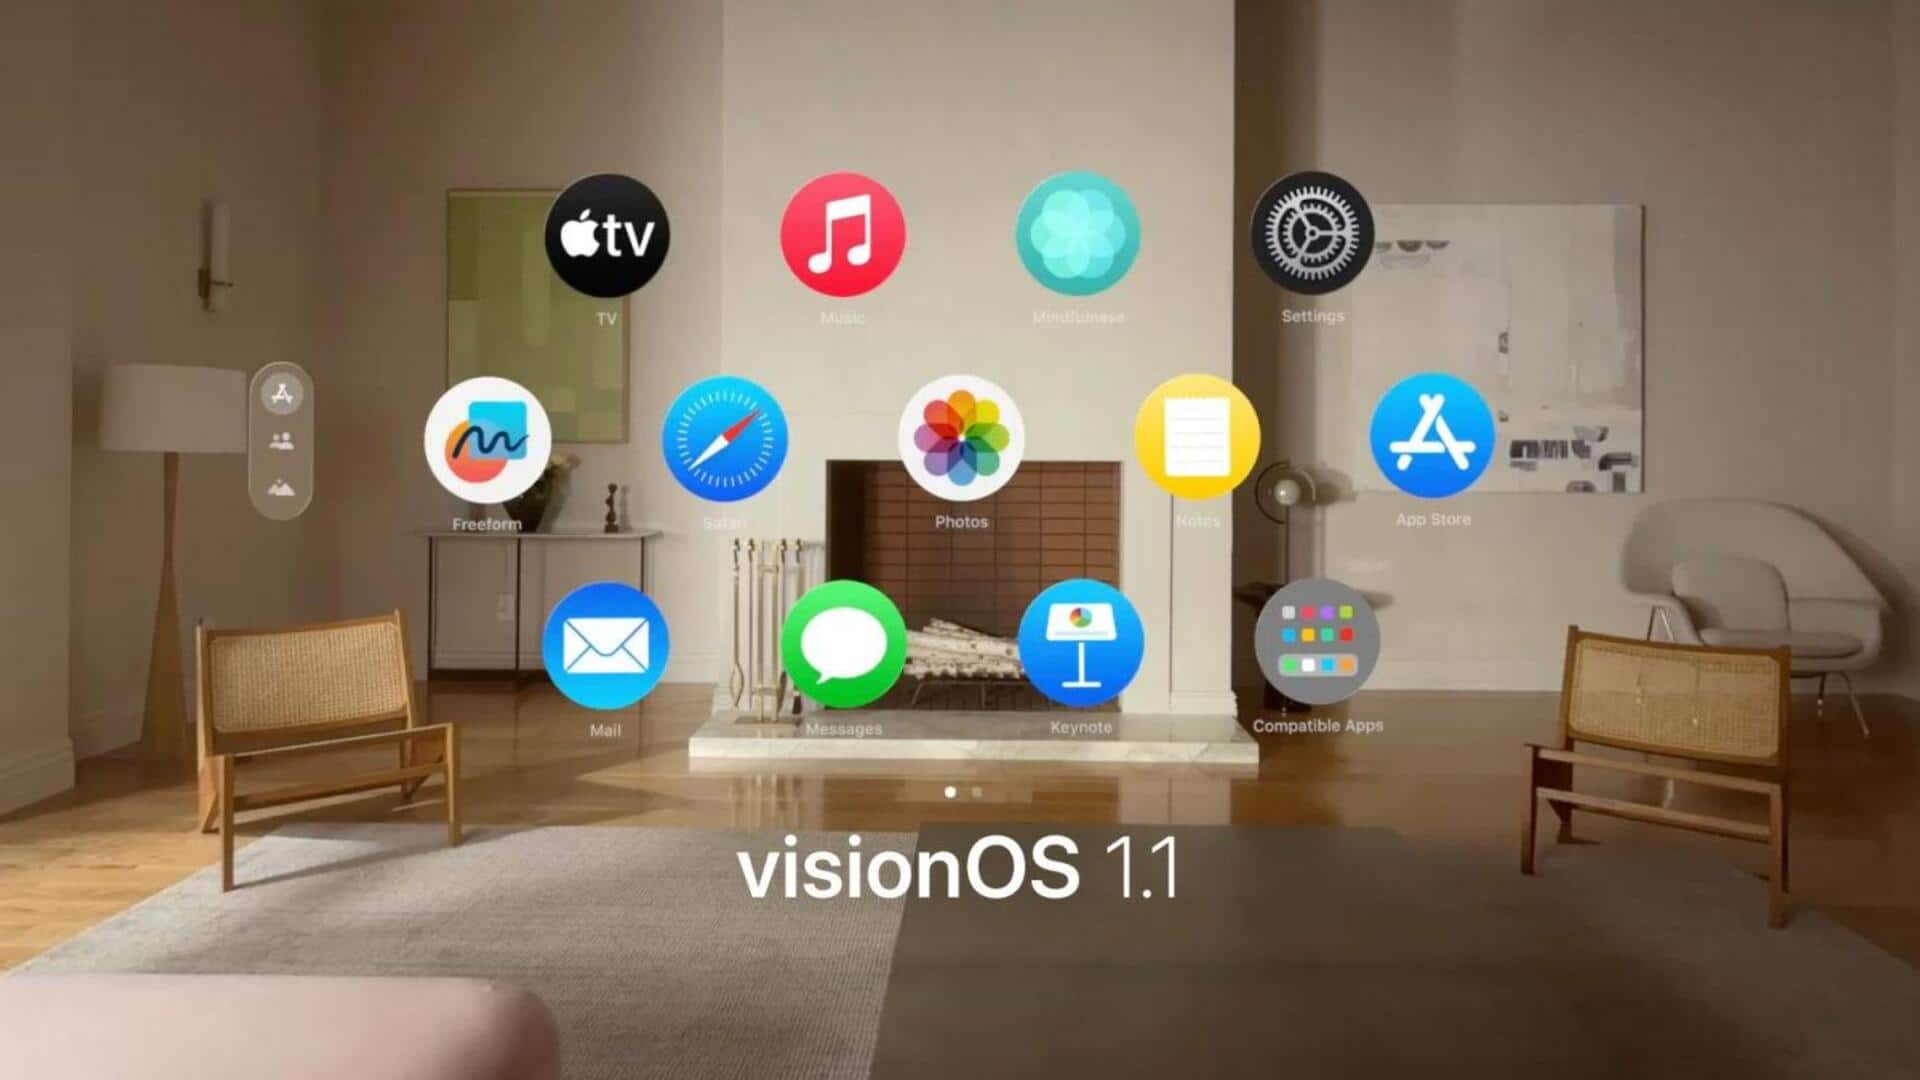 Apple releases VisionOS 1.1 with improved personas